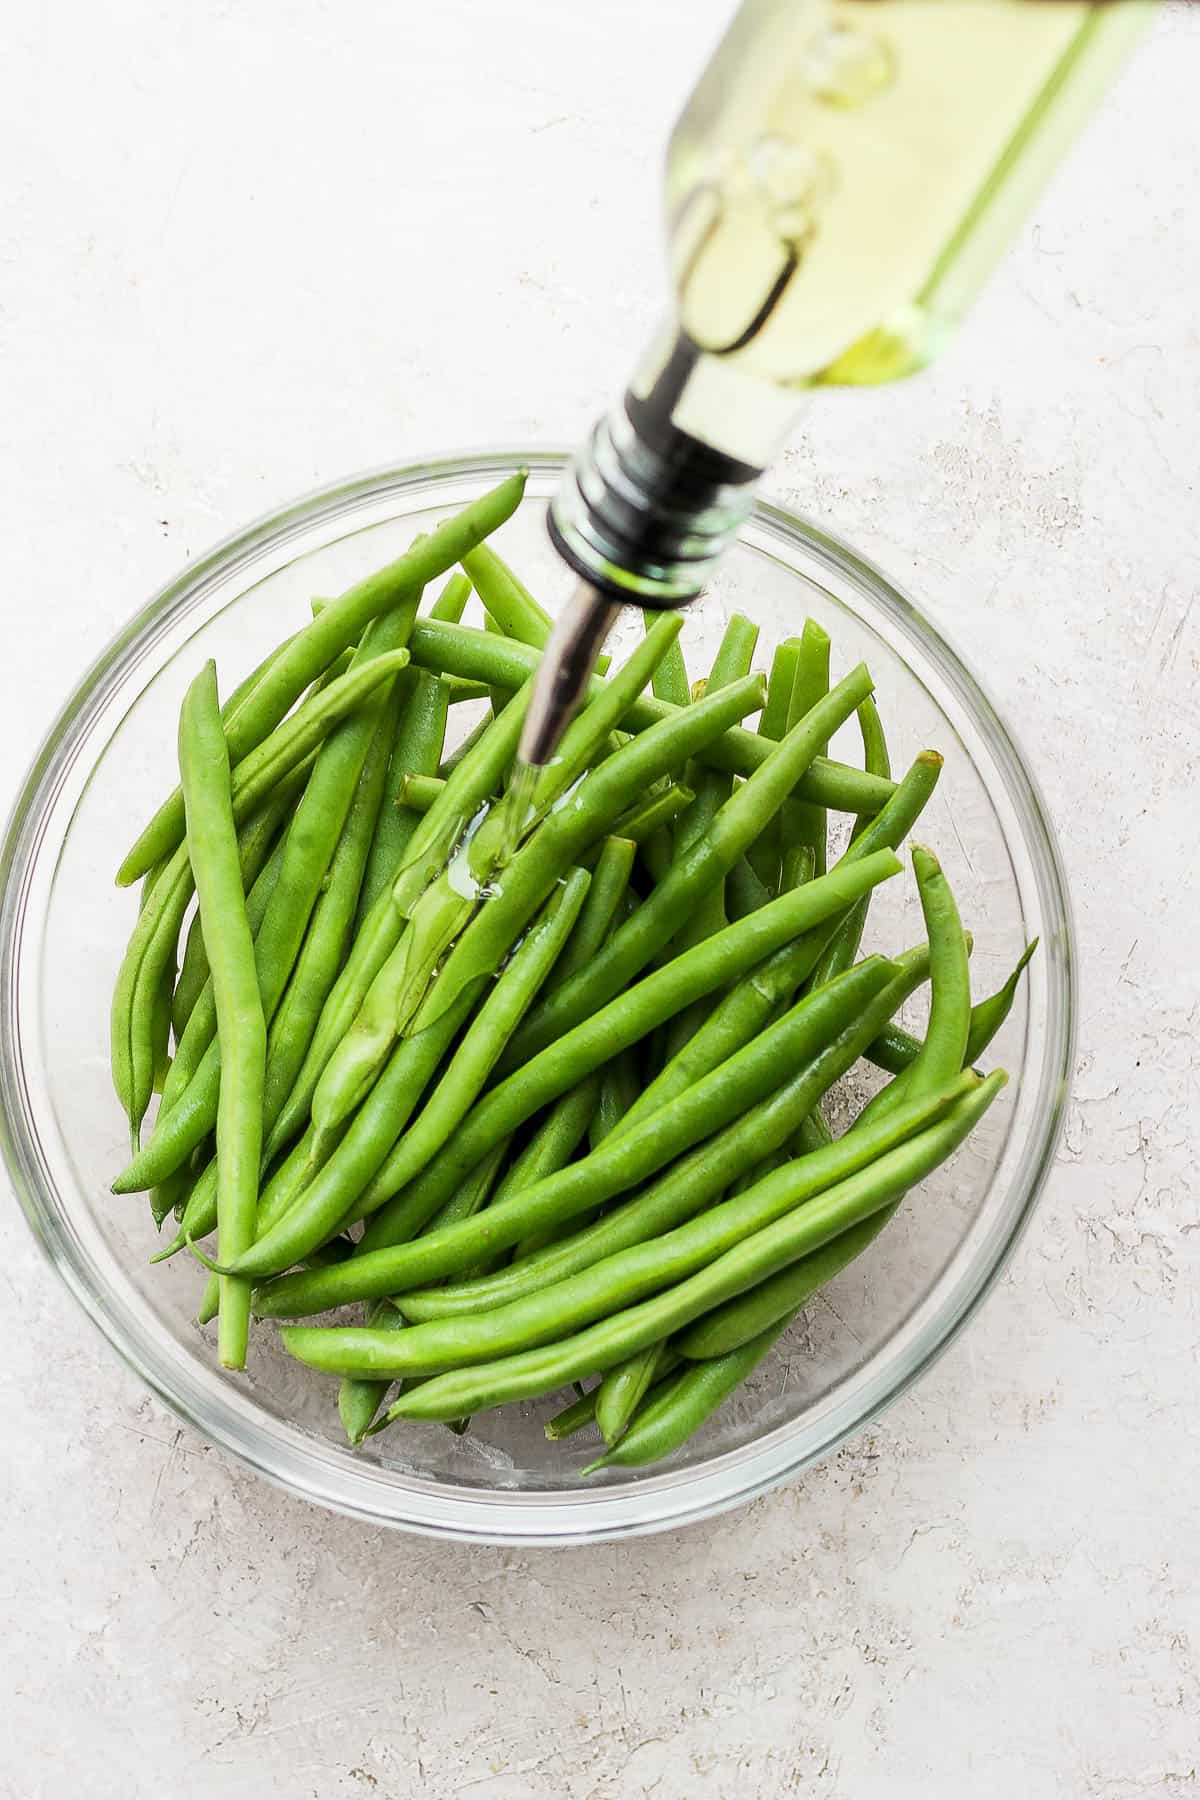 Olive oil drizzled on the fresh green beans.